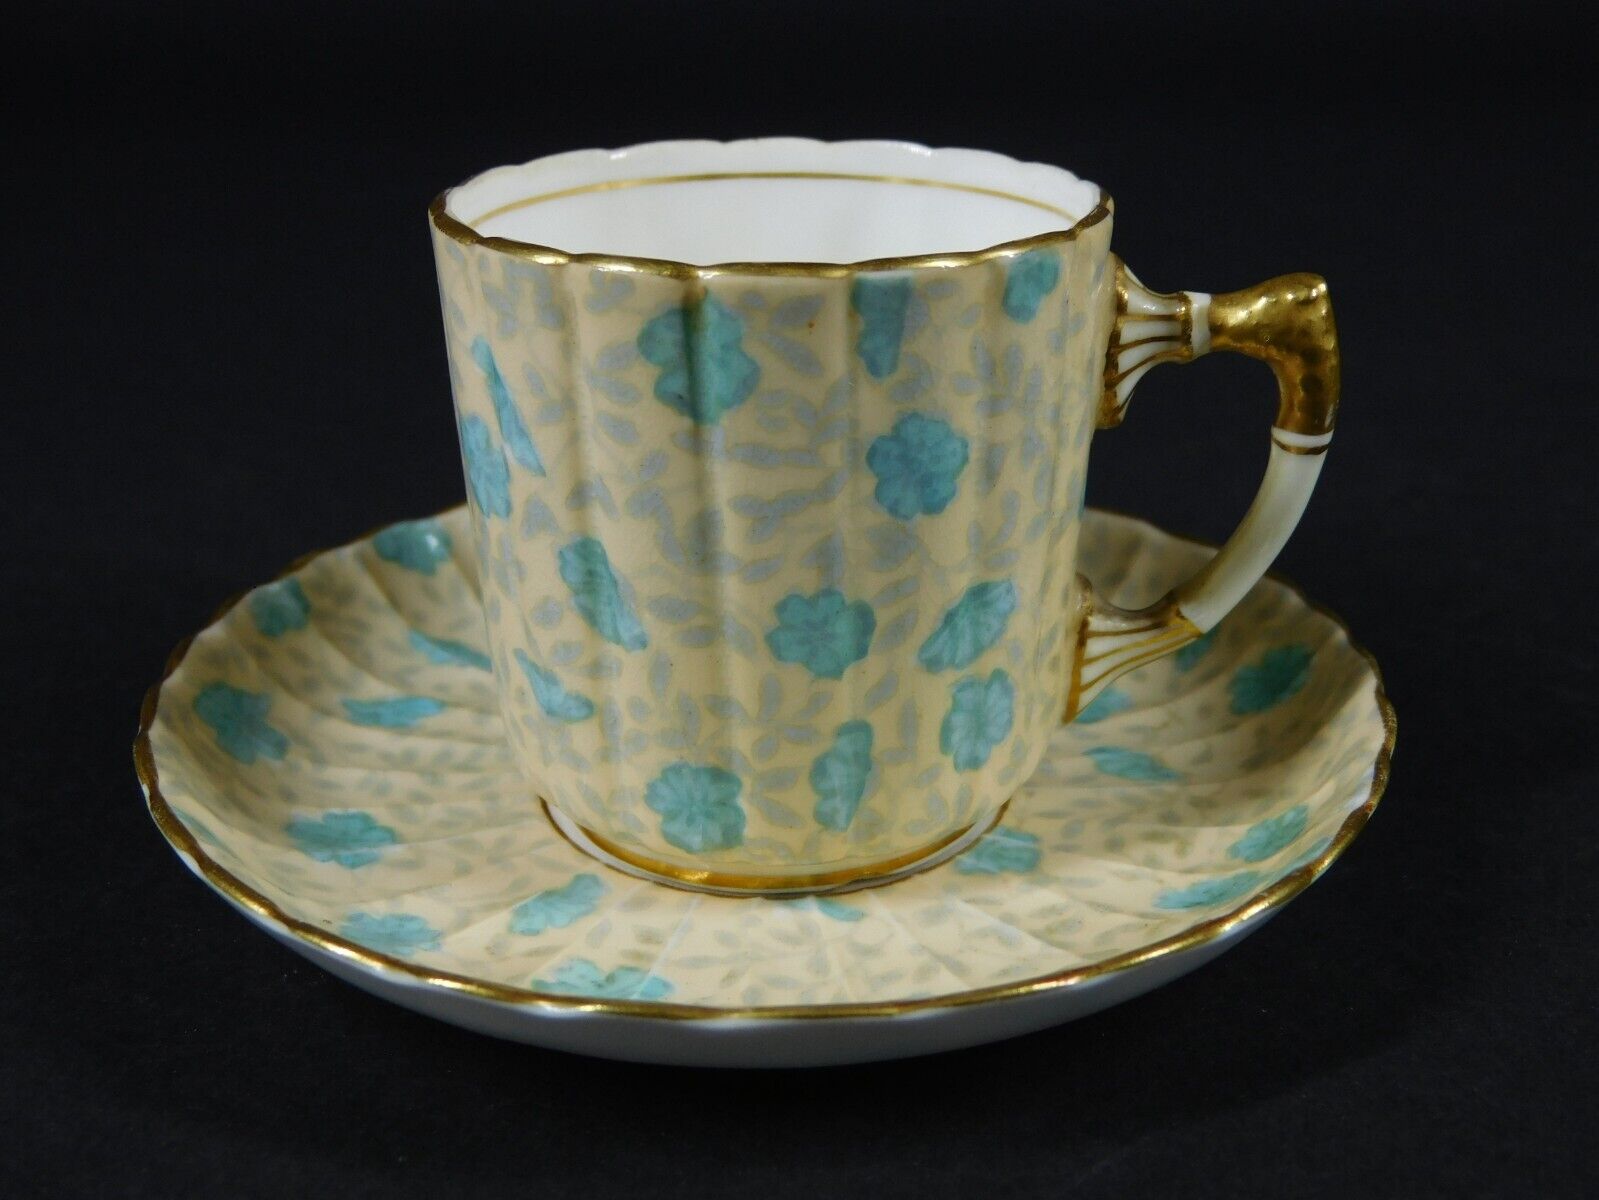 Antique Aynsley Rare Early Mark English Fluted Floral Demitasse Cup & Saucer